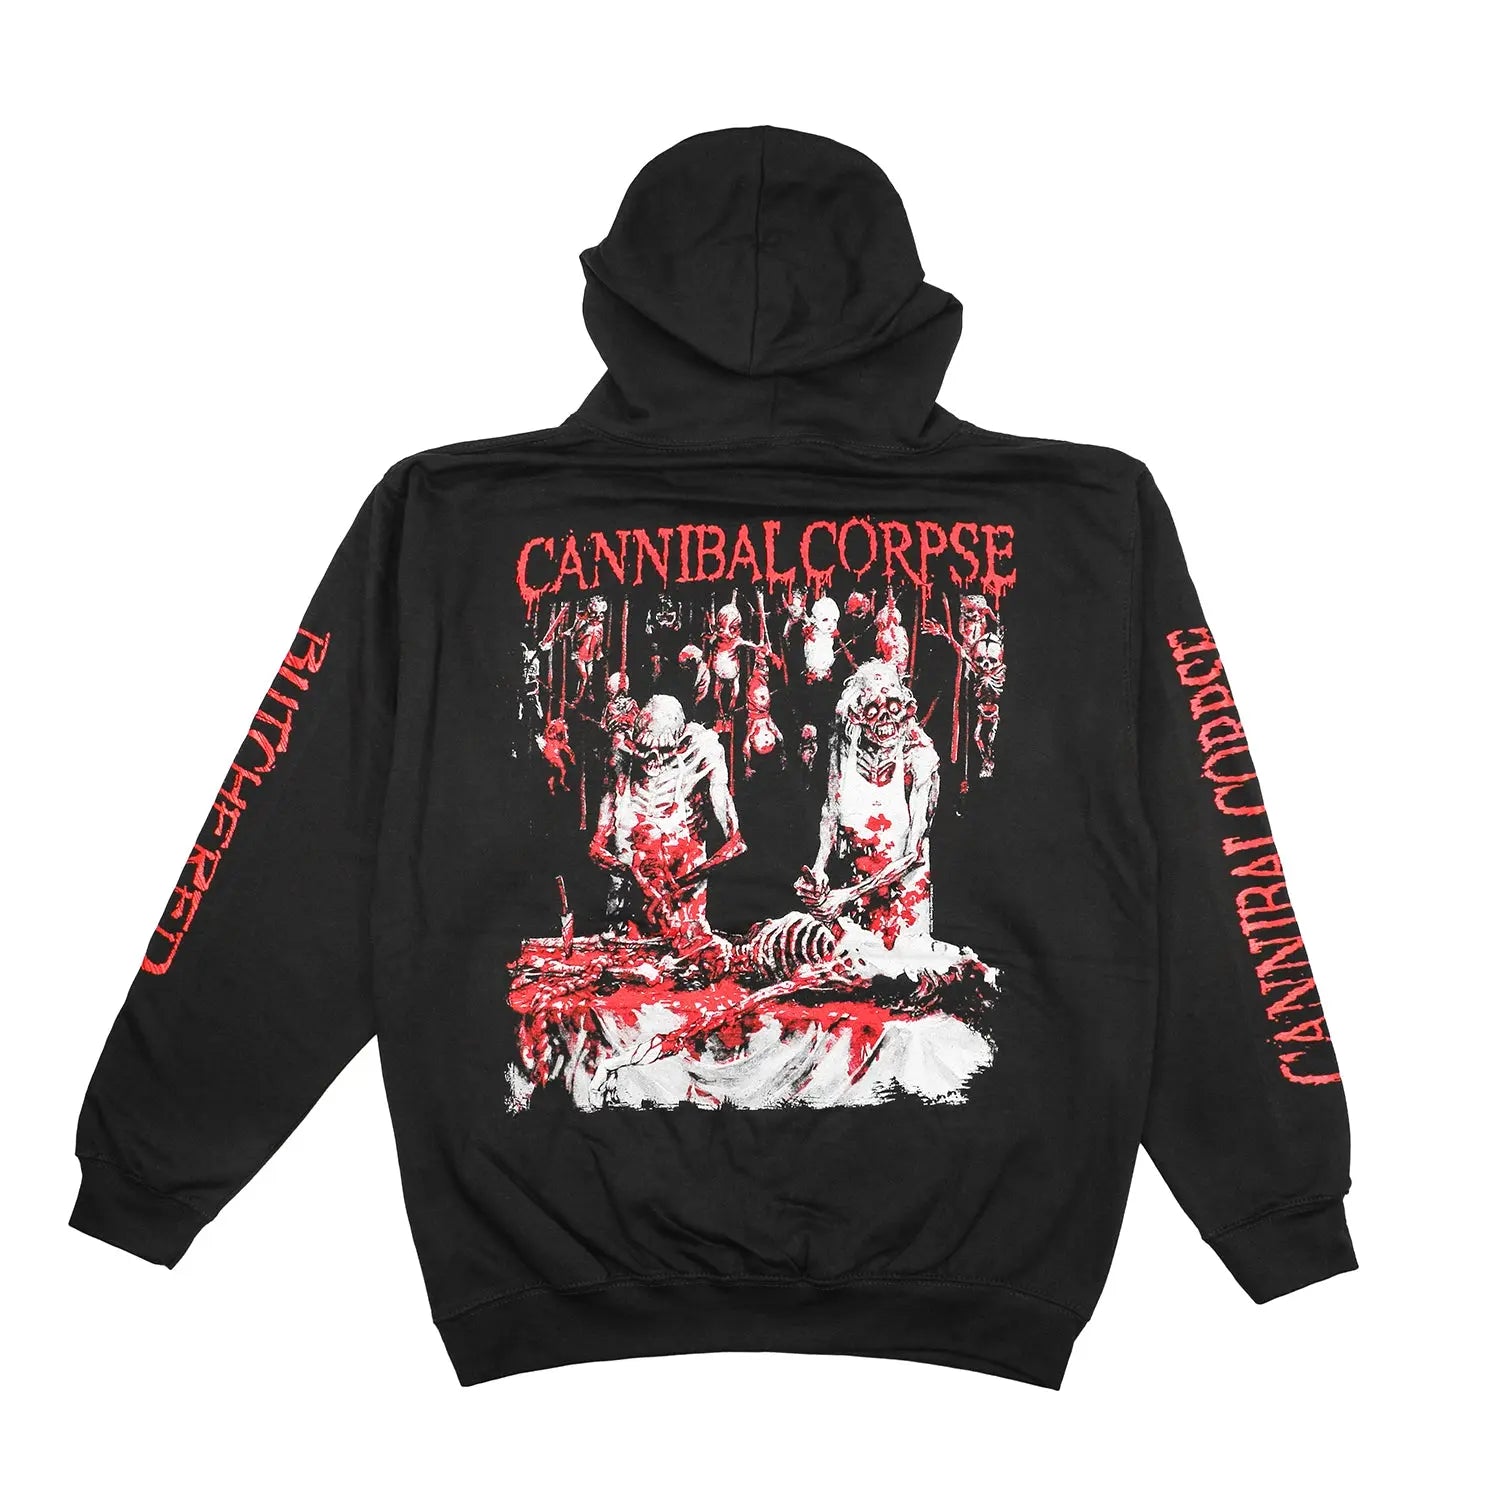 Cannibal Corpse - Butchered at Birth - Black Hoodie